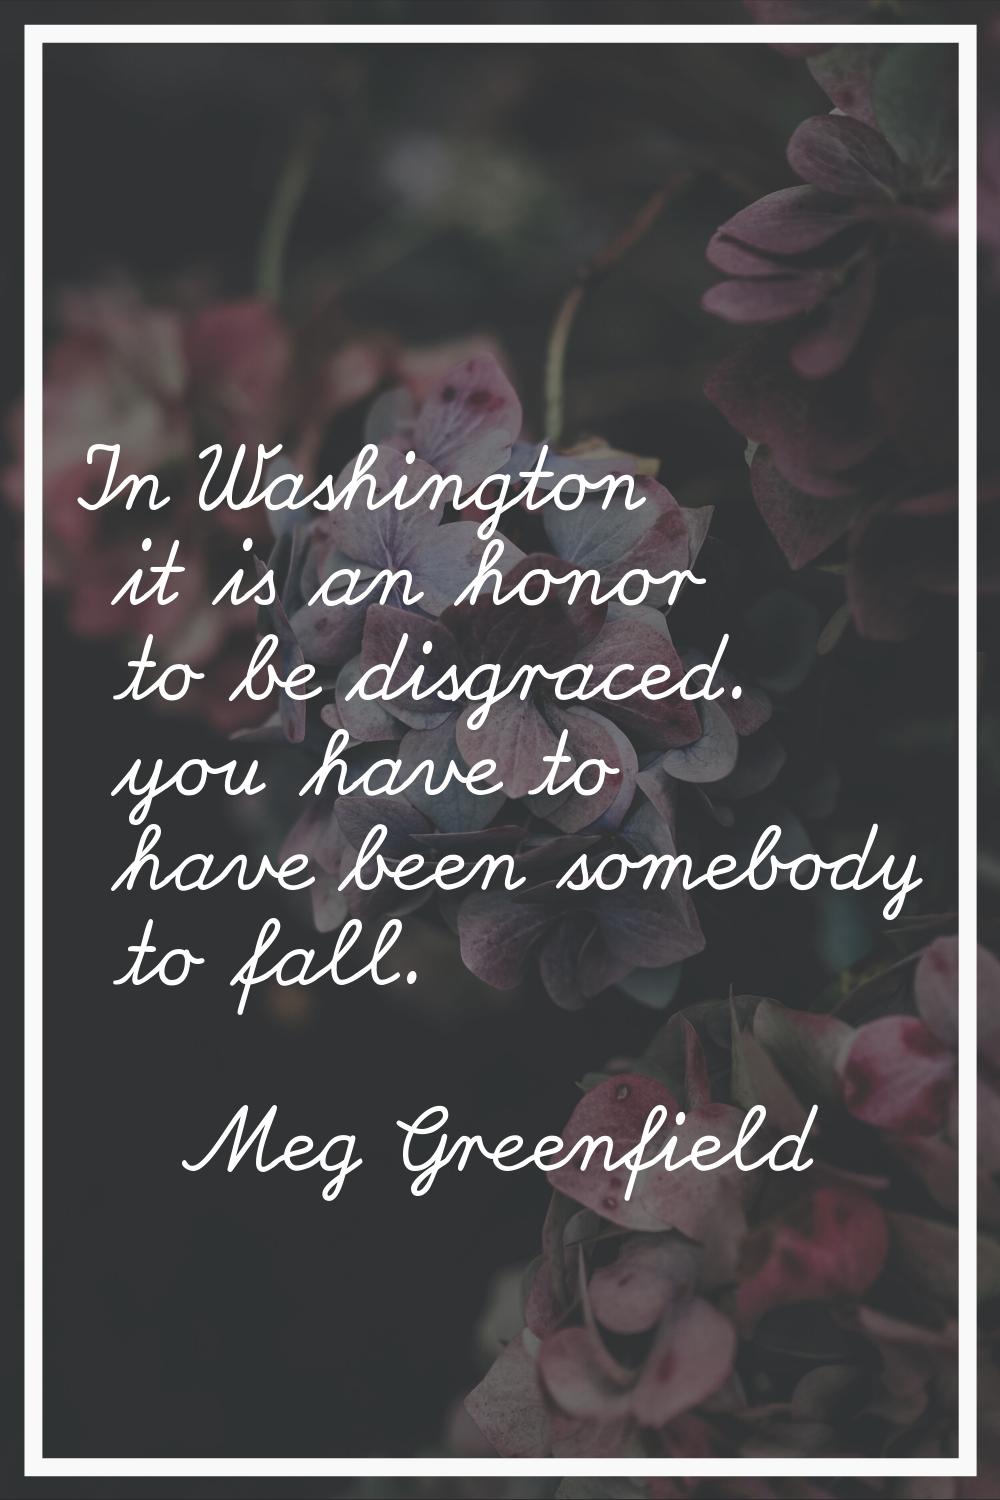 In Washington it is an honor to be disgraced. you have to have been somebody to fall.